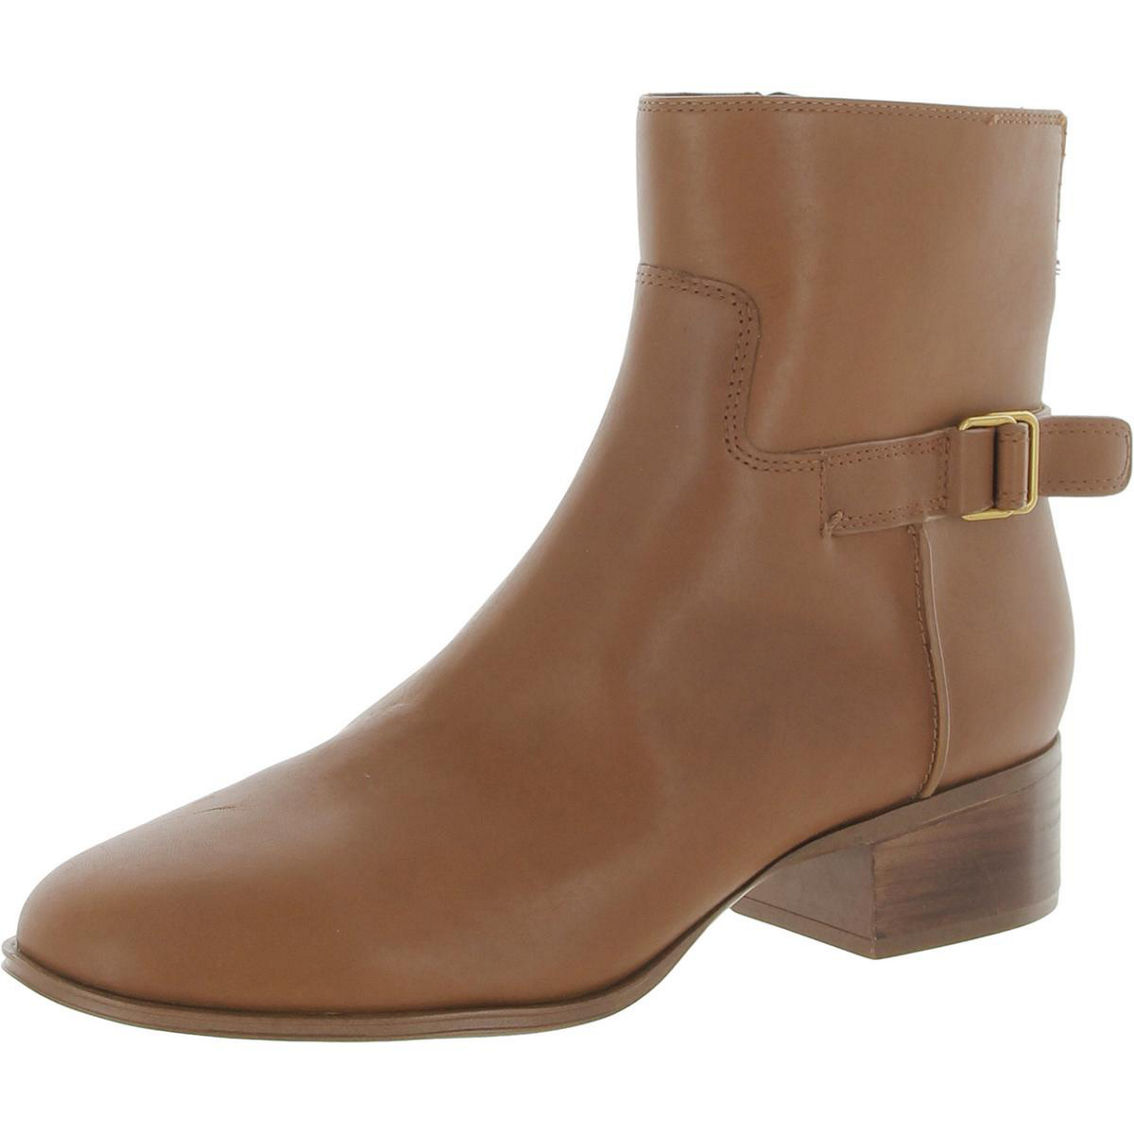 Joanne Womens Leather Western Ankle Boots - Image 4 of 4